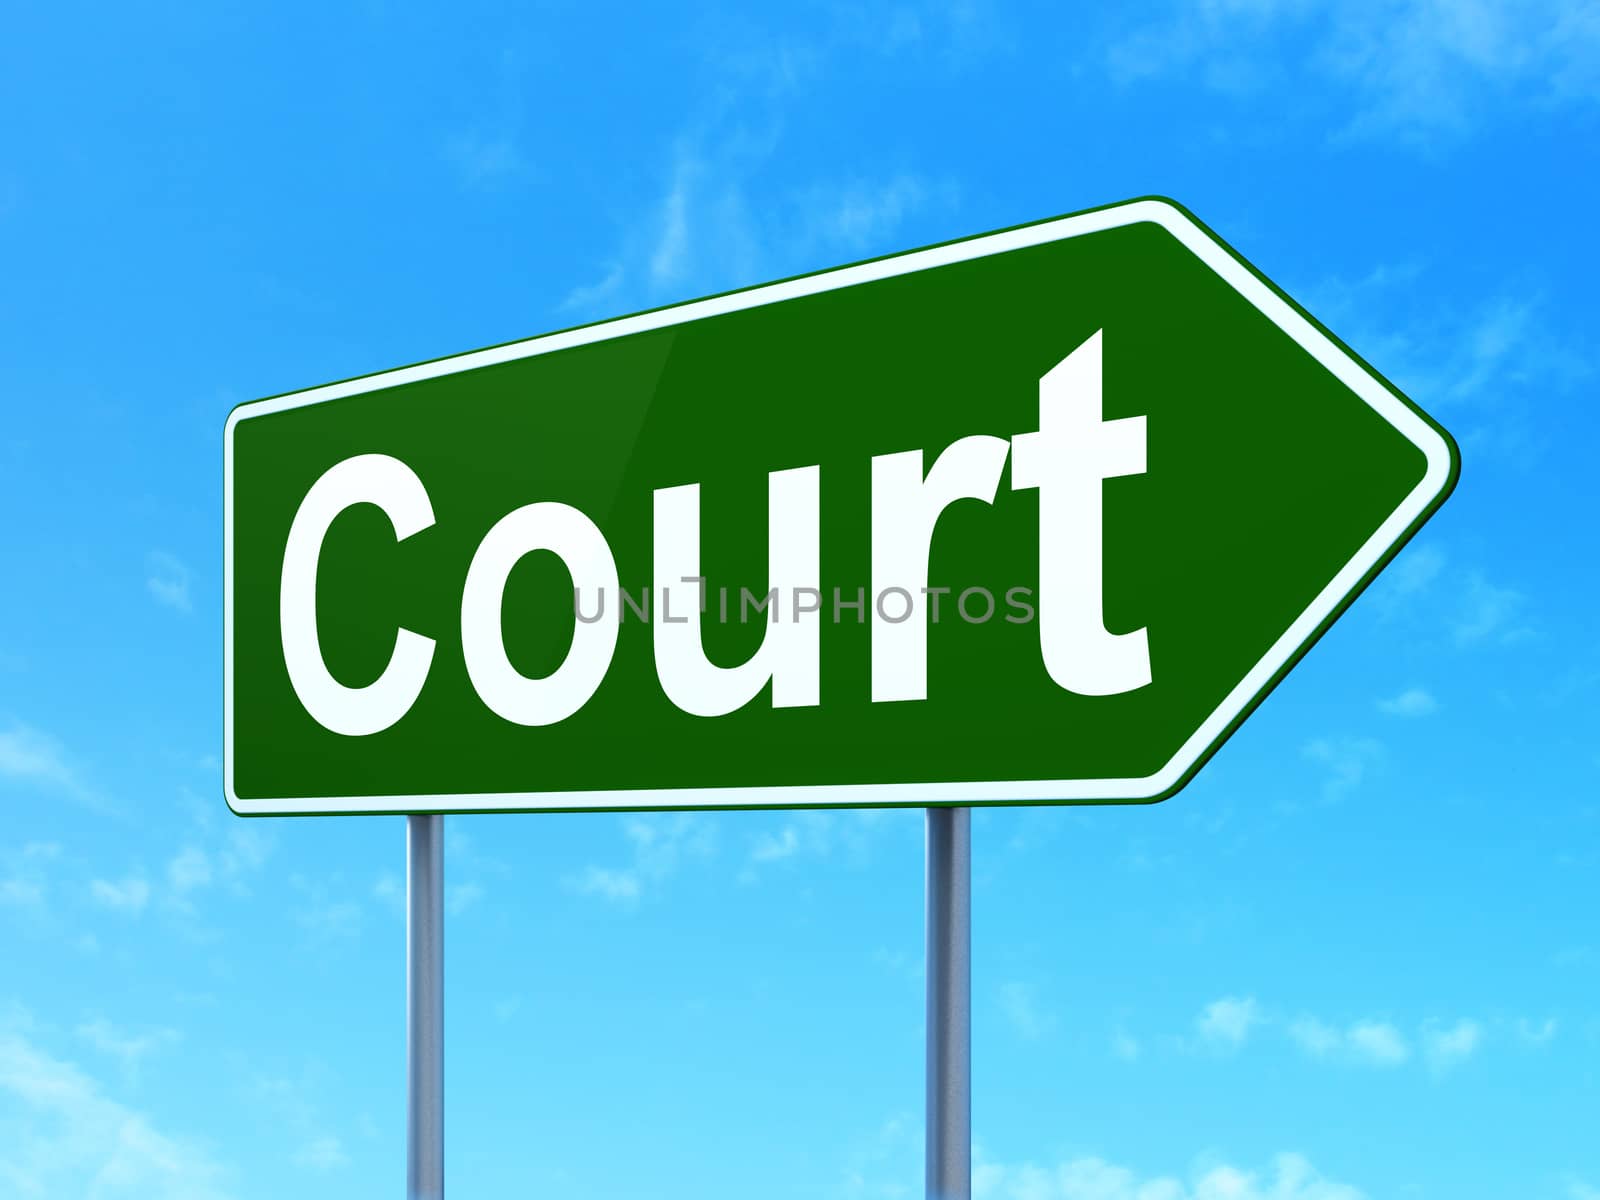 Law concept: Court on green road (highway) sign, clear blue sky background, 3d render